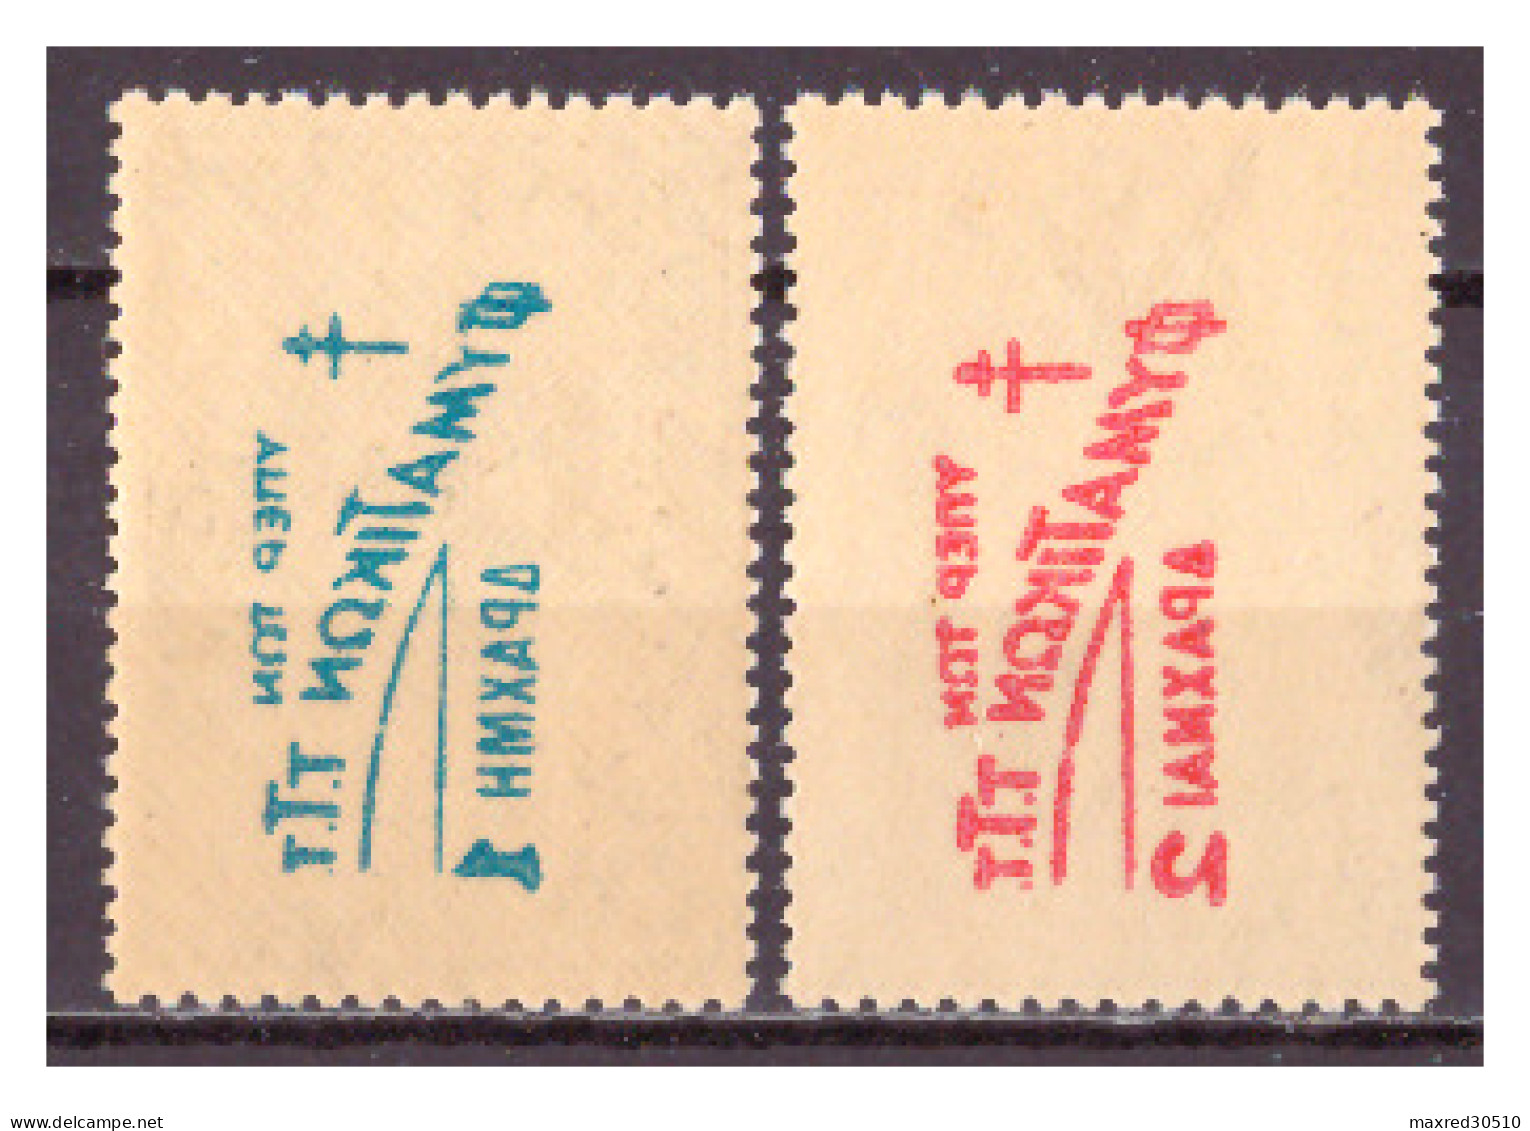 GREECE 1945 CHARITY SET "1937 STAMPS WITH OVERPRINT" WITH MIRROR PRINTING AT THE GUM ERROR MNH - Plaatfouten En Curiosa